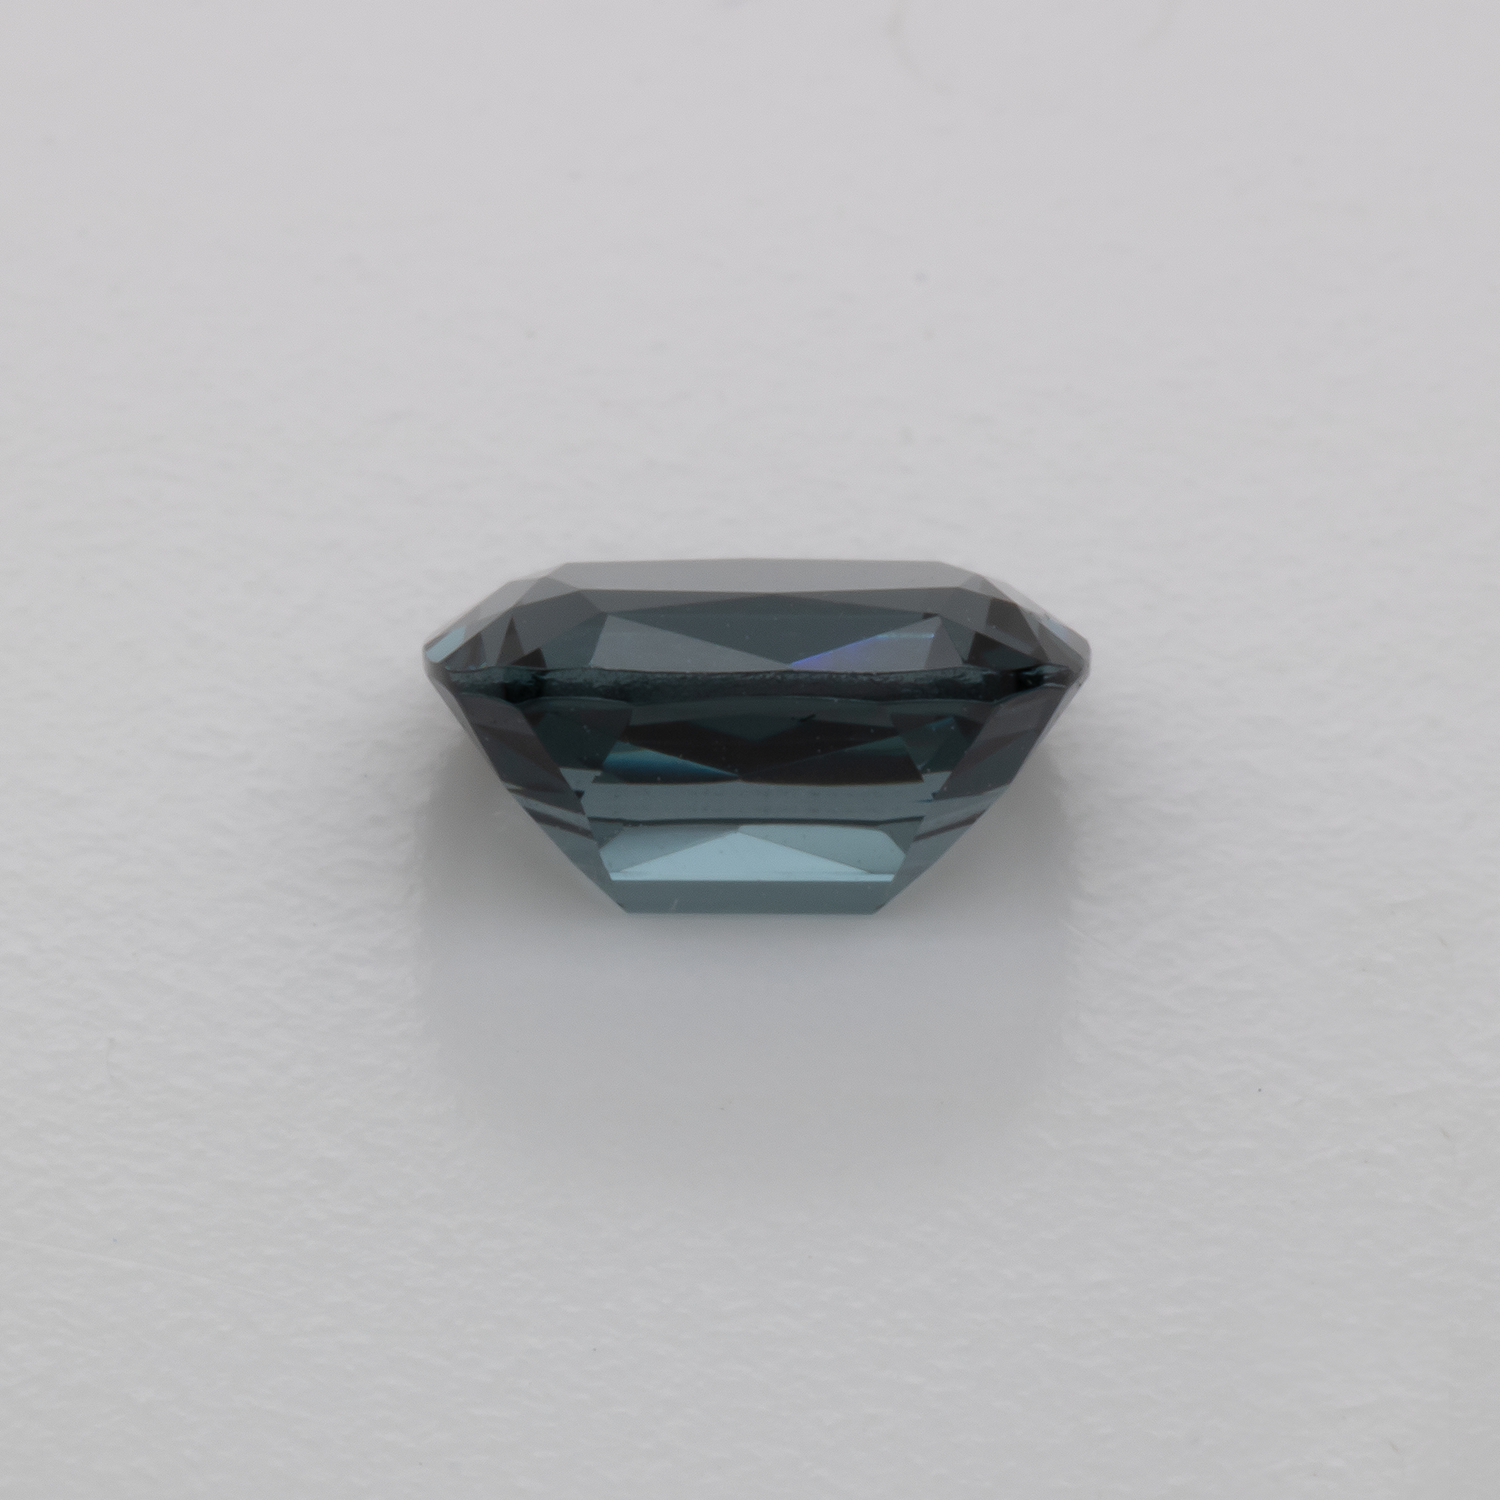 Spinel - grey, cushion, 7.1x5.5 mm, 1.22 cts, No. SP90053